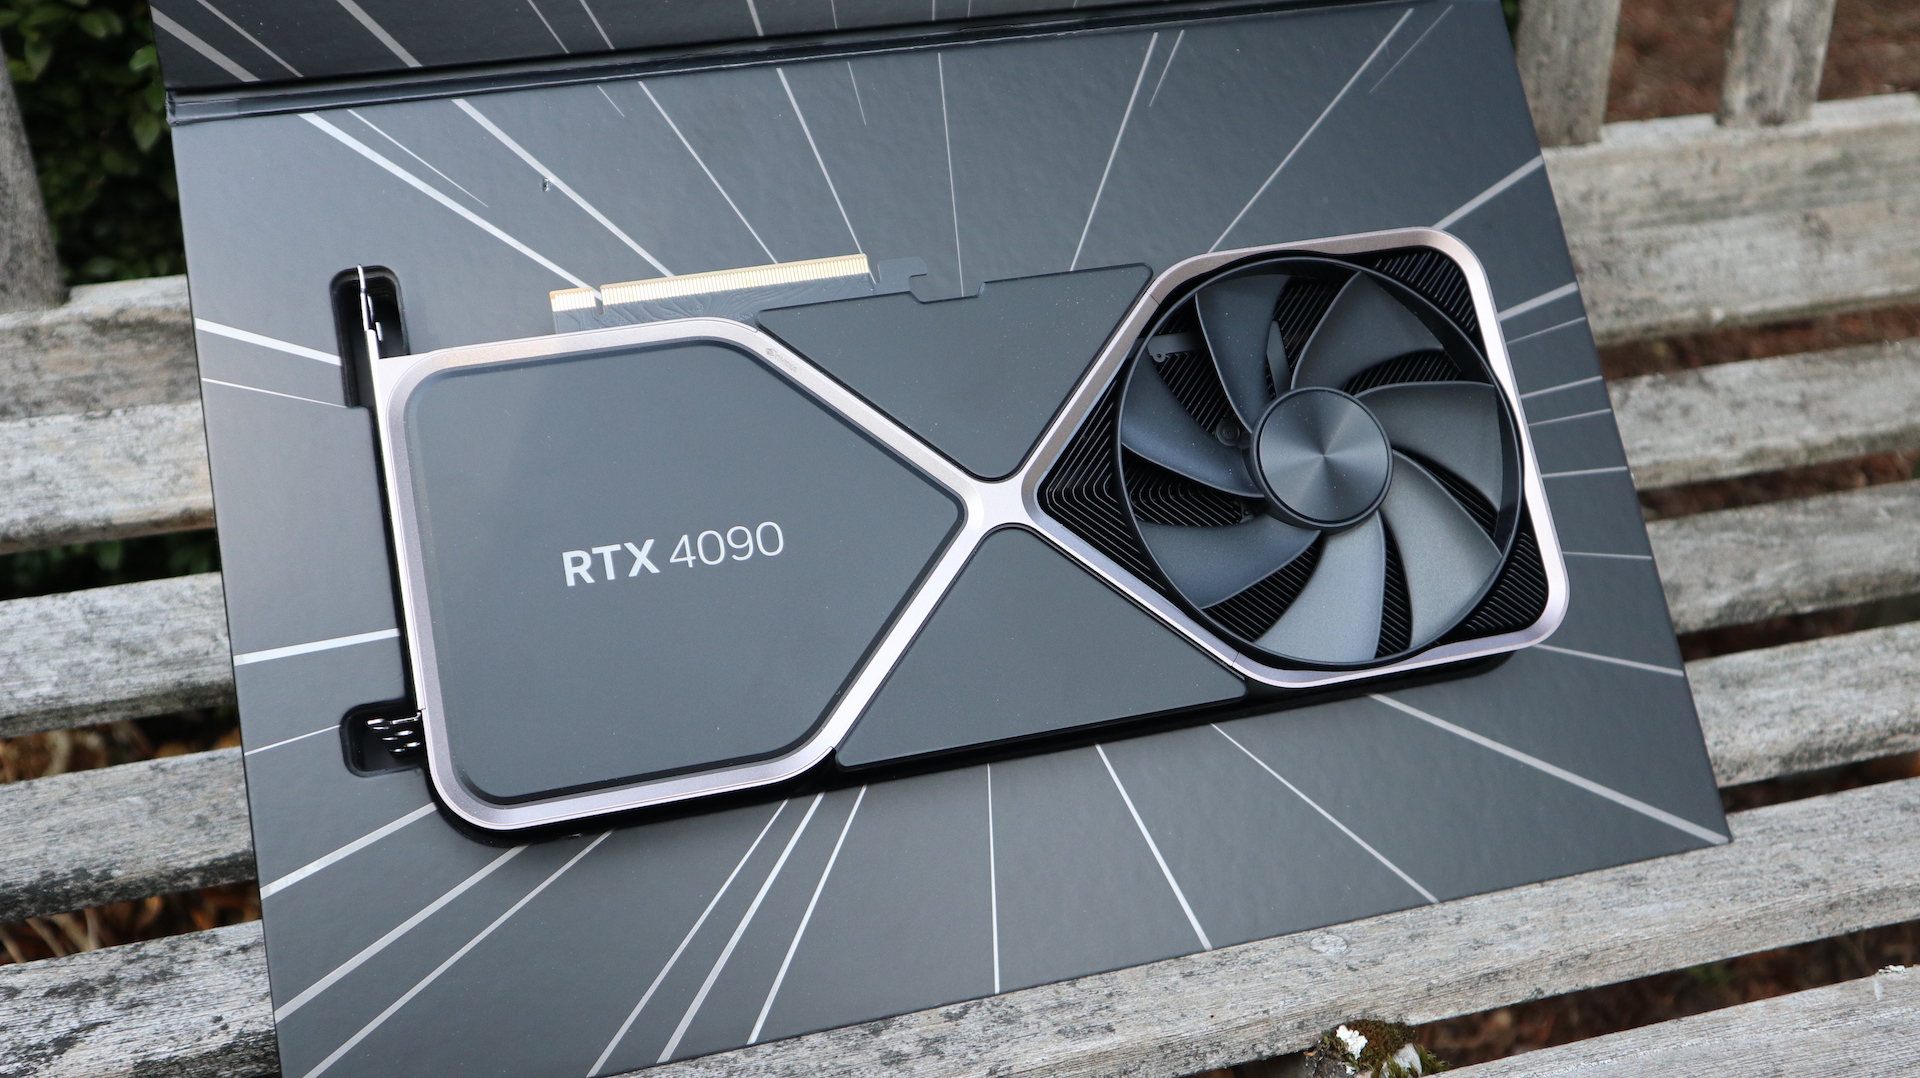 New Analysis Confirms That Defective RTX 4090 Connectors Lead To Extreme Overheating And Melting!